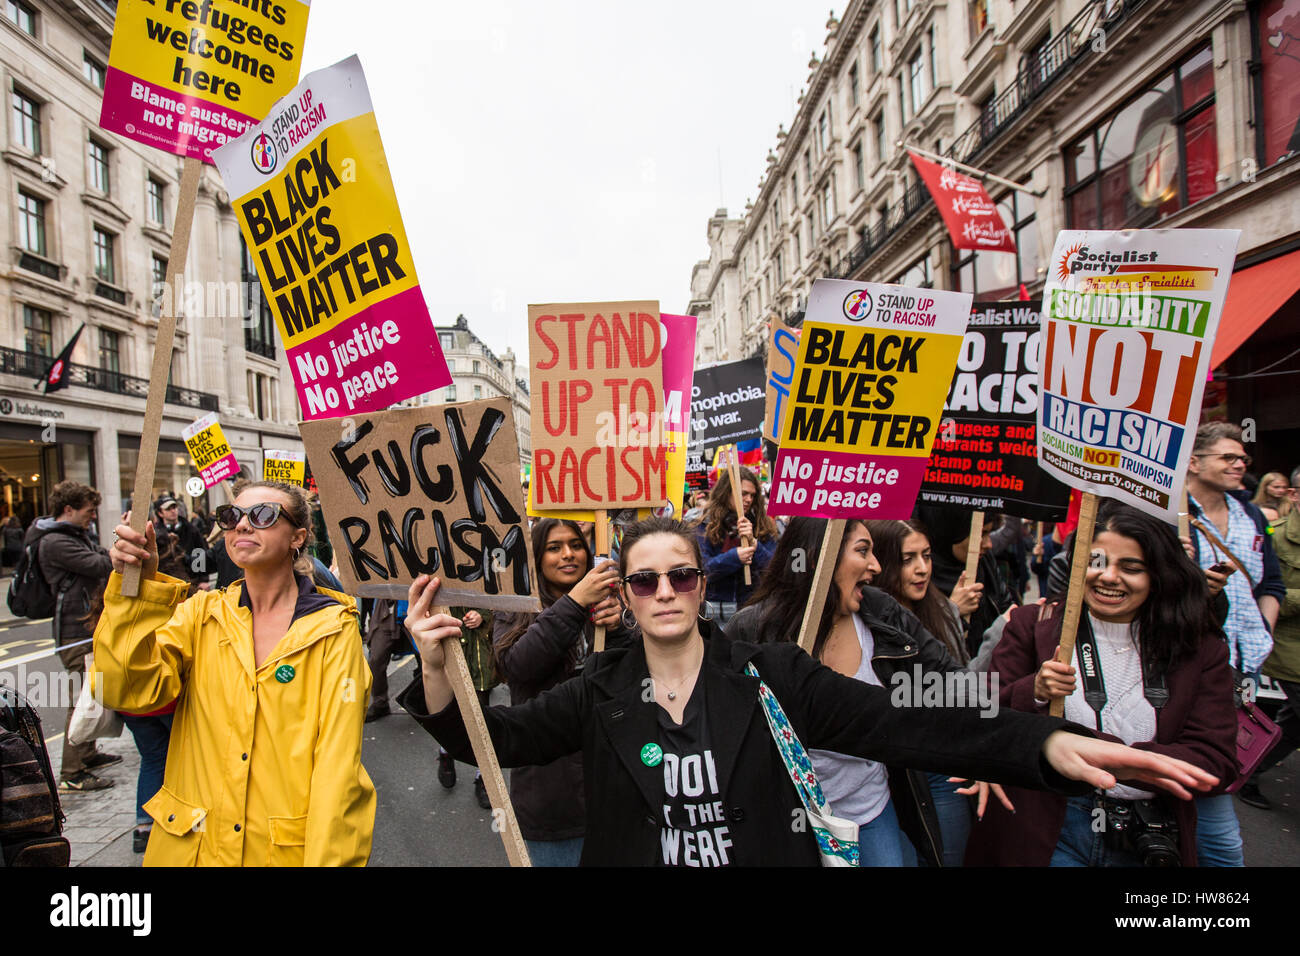 London, UK. 18th Mar, 2017. Thousands marched through London on the National rally against Racism organised by 'Stand up to Racism'. David Rowe/Alamy News Live. Stock Photo